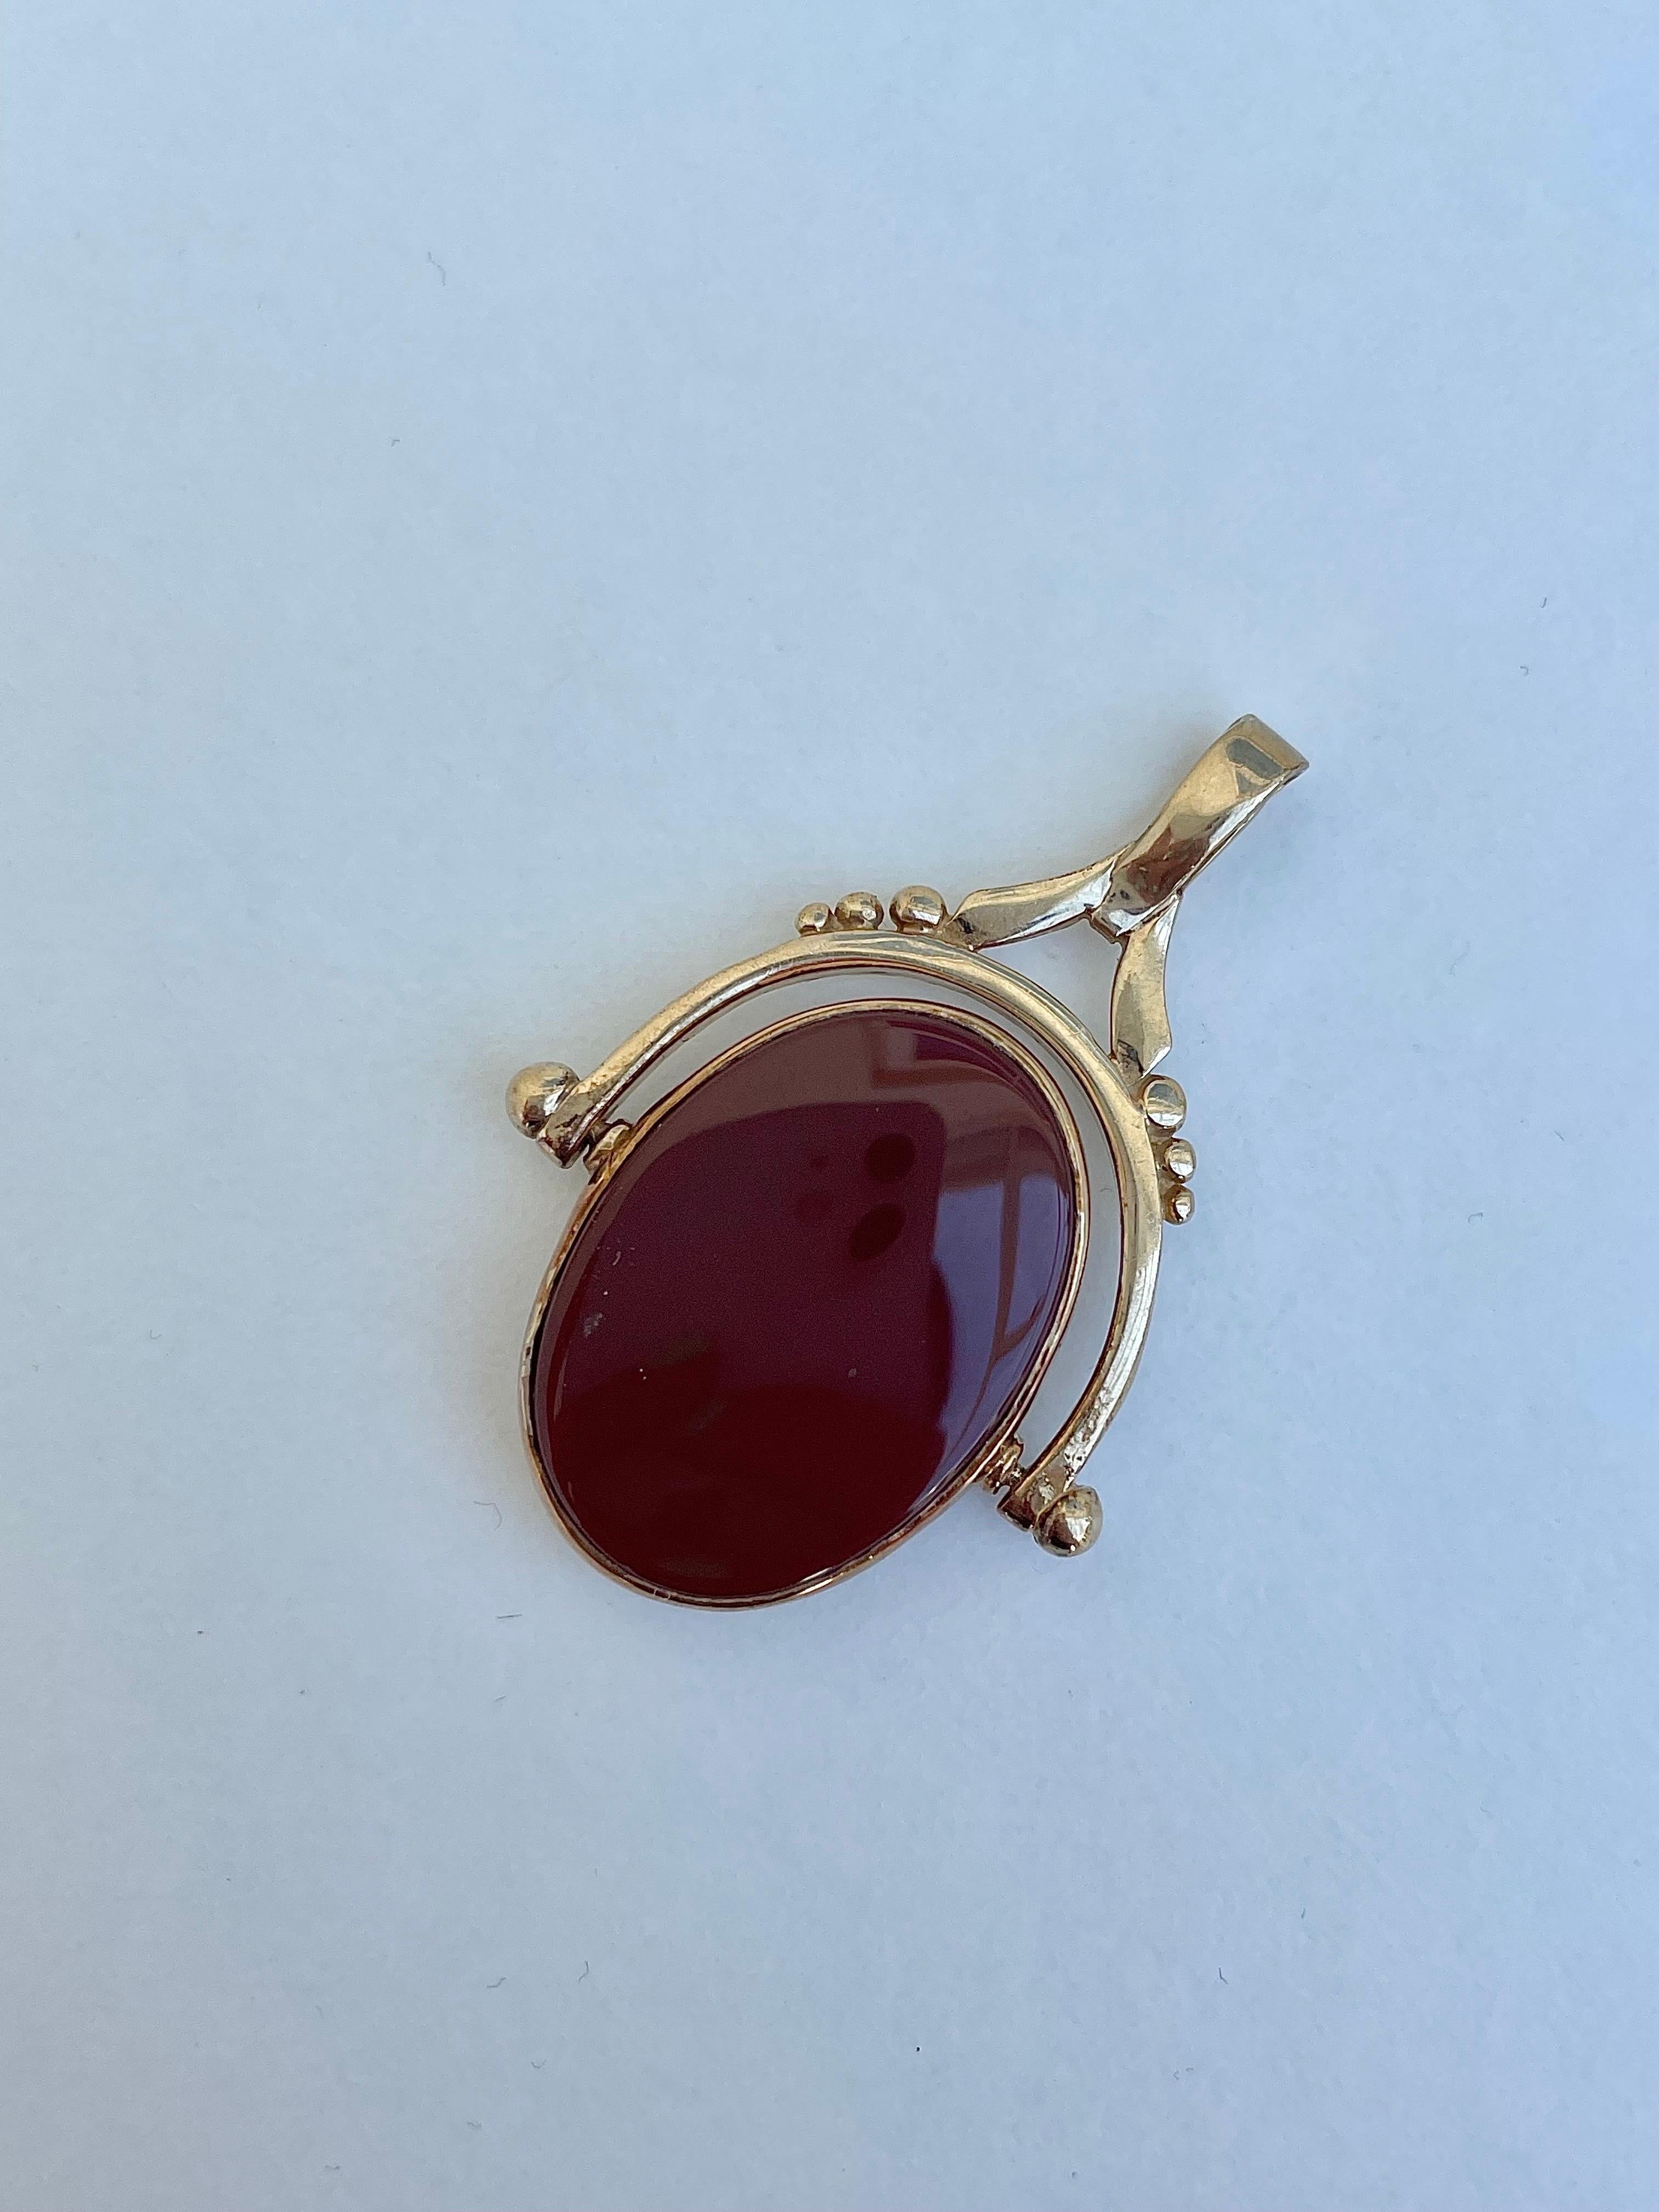 Vintage Large Oral Onyx and Carnelian 9ct Yellow Gold Spinning Fob Pendant 

beautiful spinning fob pendant

The item comes without the box in the photos but will be presented in a  gift box

Measurements: weight 9.73g, length 42.2mm, width 28.8m